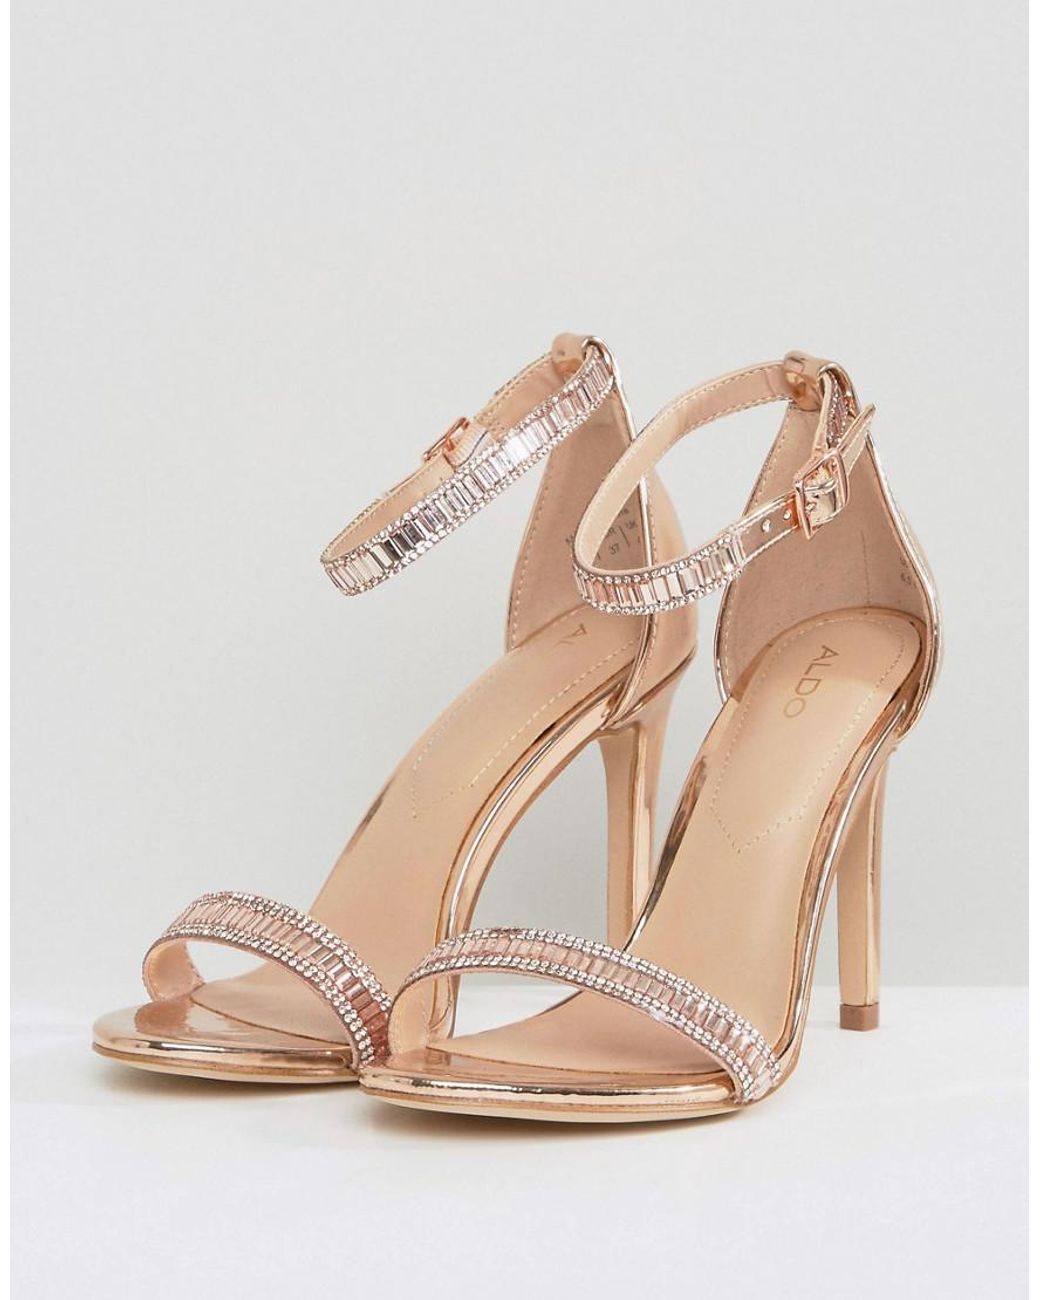 STYLZ-Rose Gold Ankle Strap Clear Heels